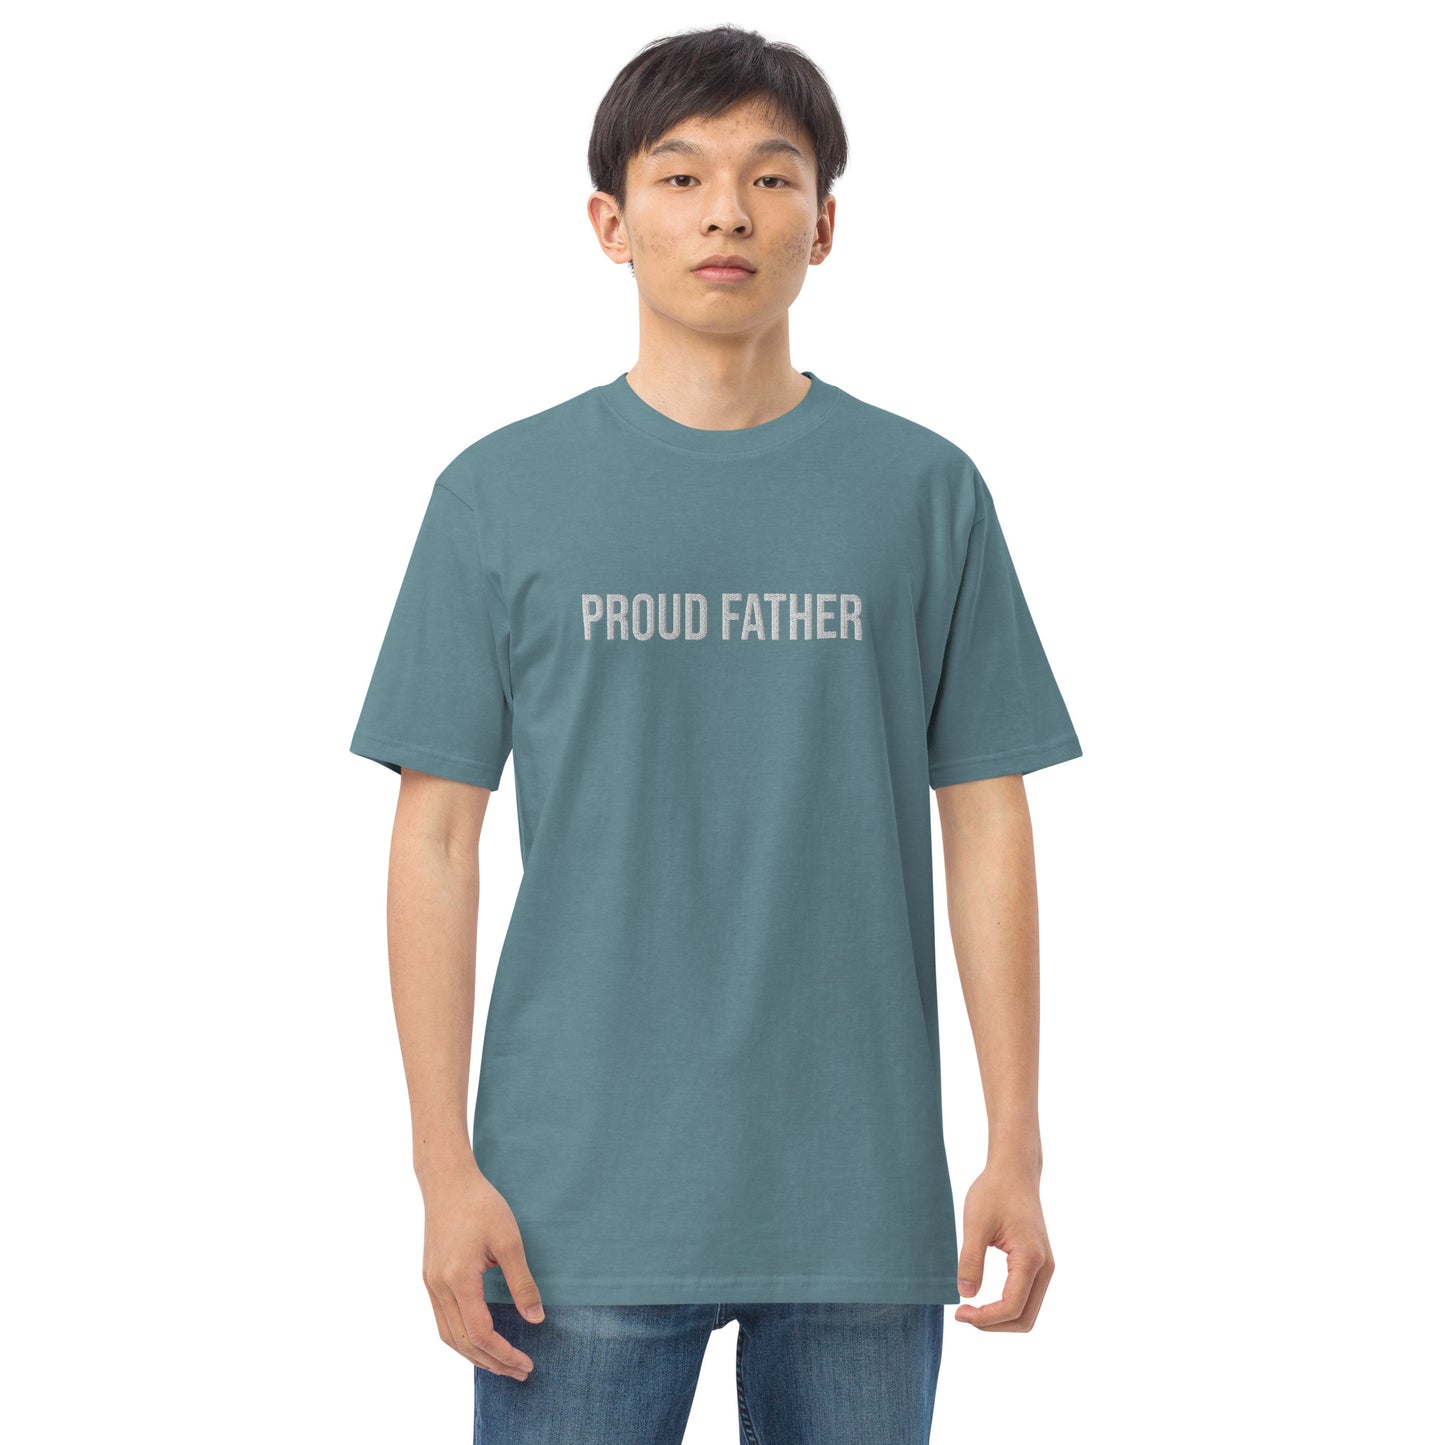 Proud Father / Proud Father's Club Embroidered Men’s Heavyweight T-Shirt